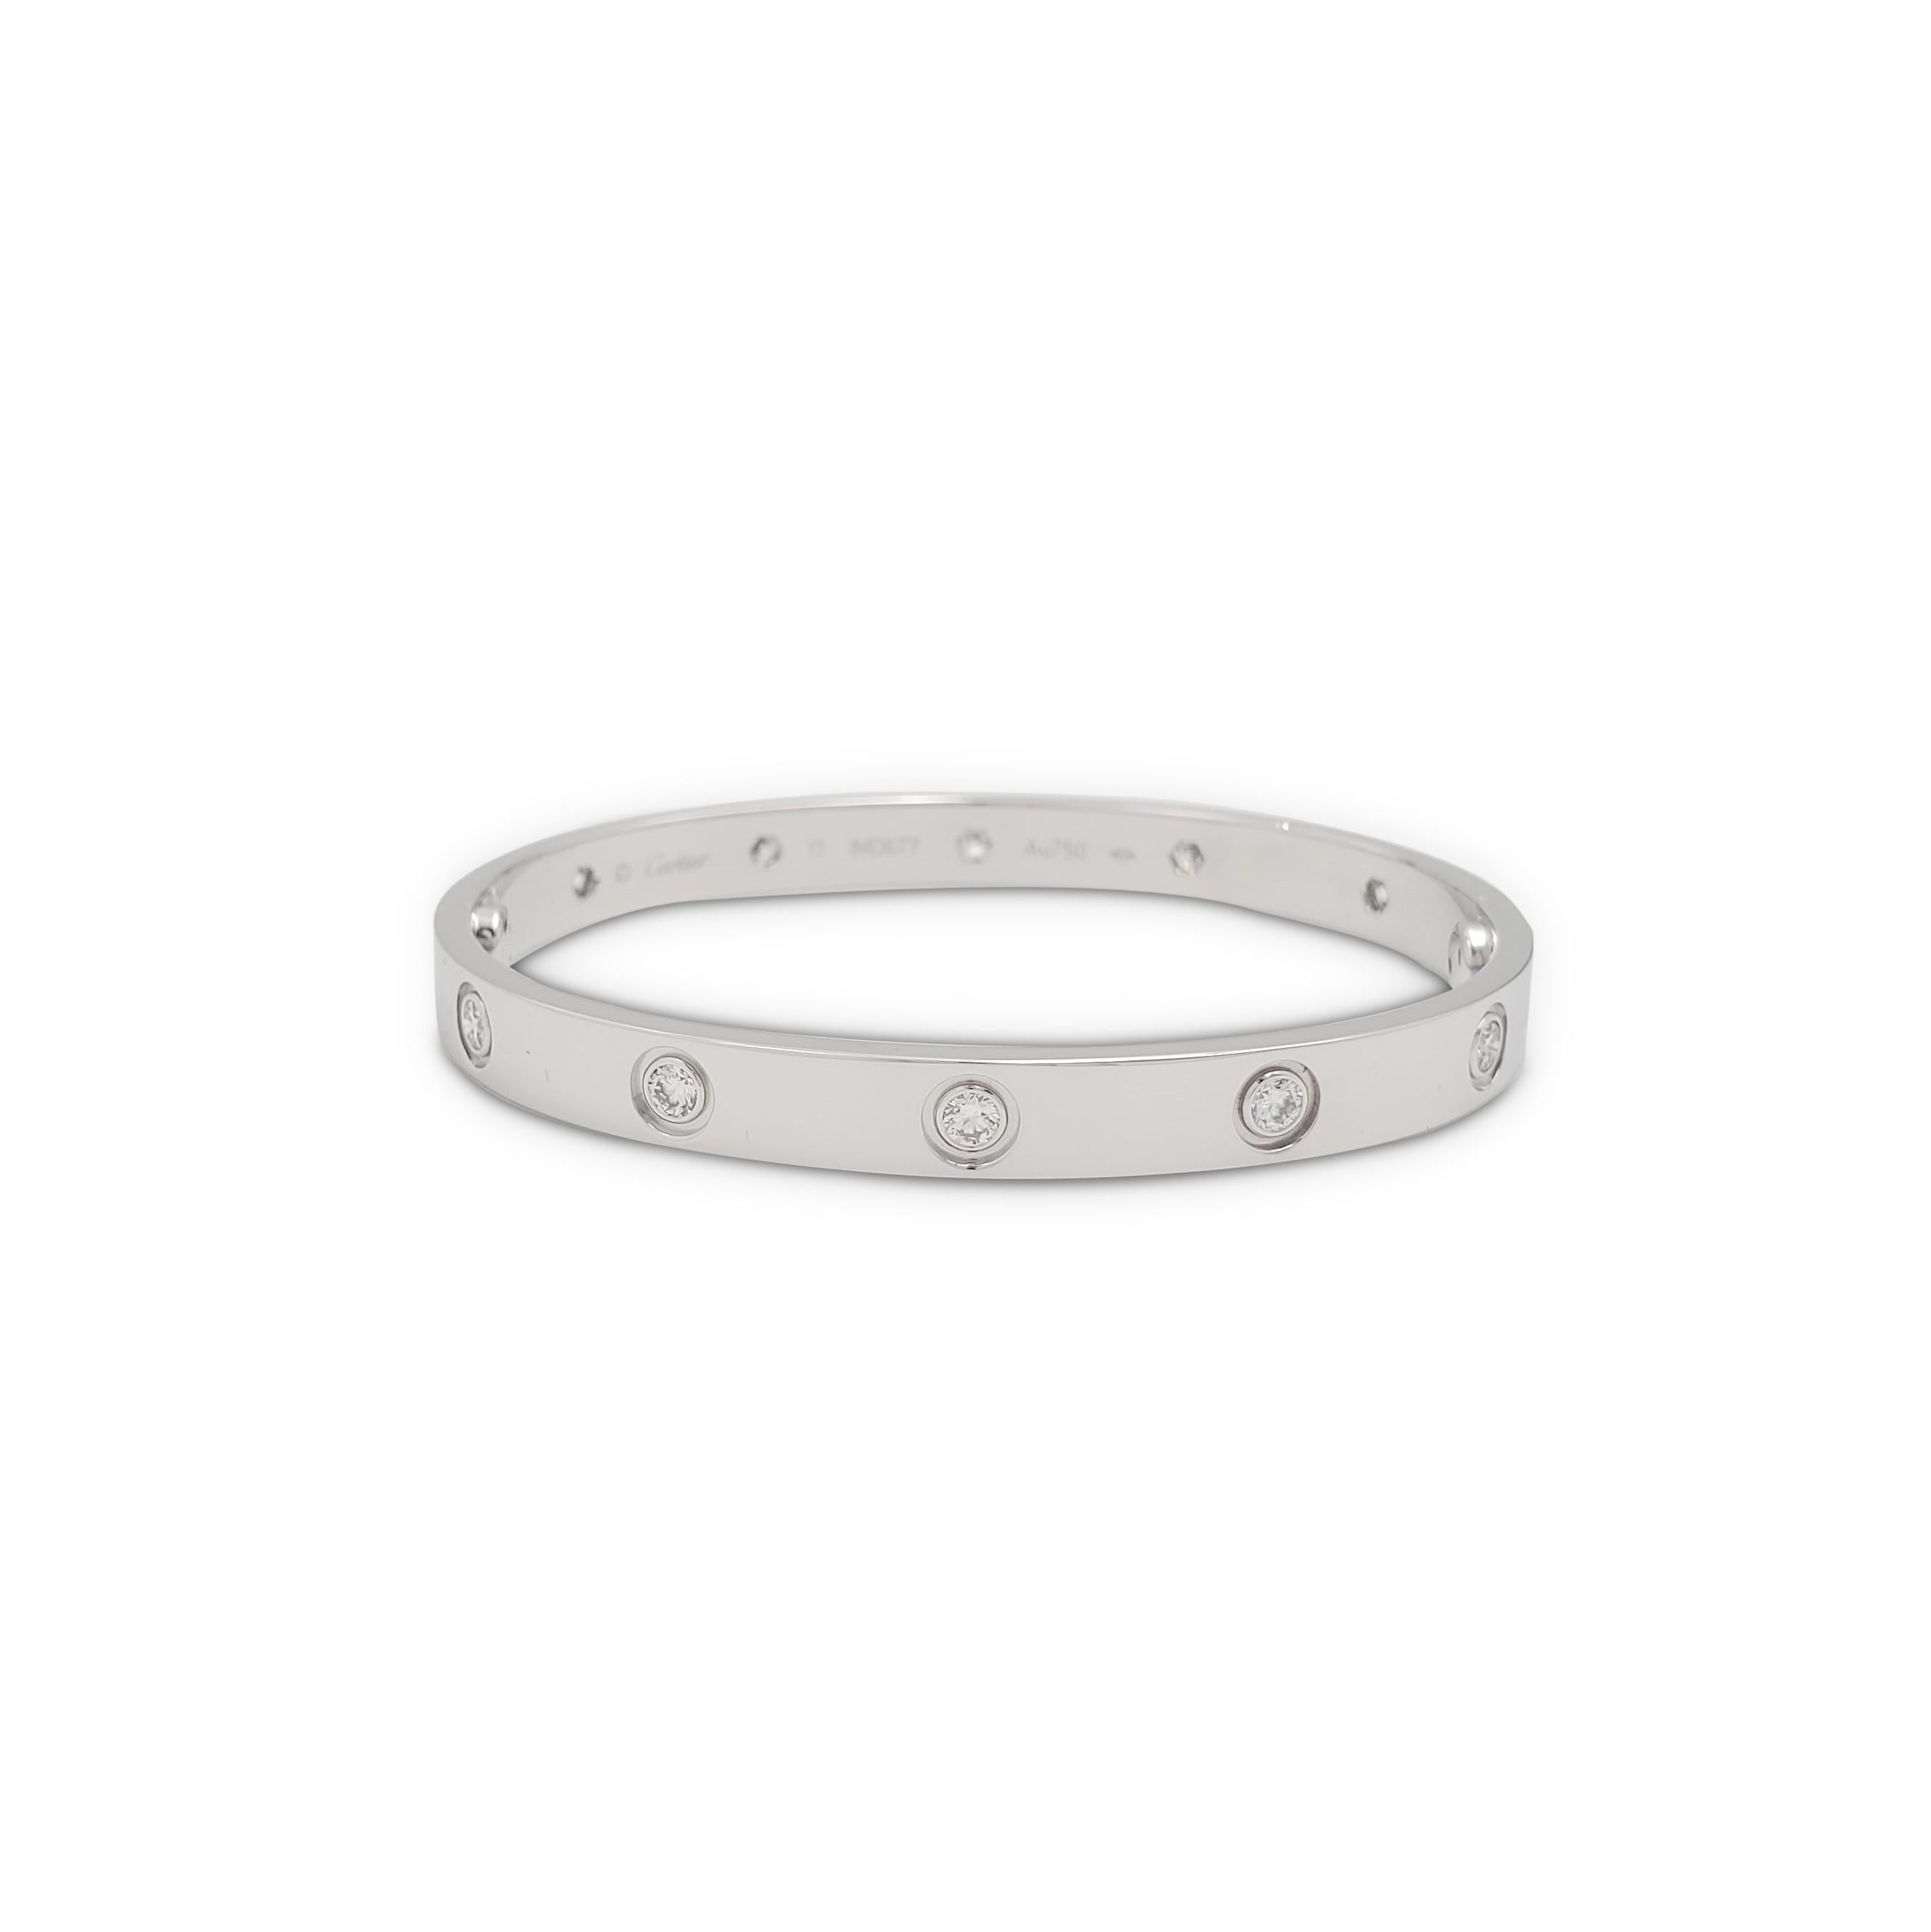 Authentic Cartier 'Love' bracelet crafted in 18 karat white gold is set with ten round brilliant cut diamonds (E-F, VS) weighing 0.96 carats total. Signed Cartier, Au750, 17, with serial number. The bracelet is presented with the original papers,